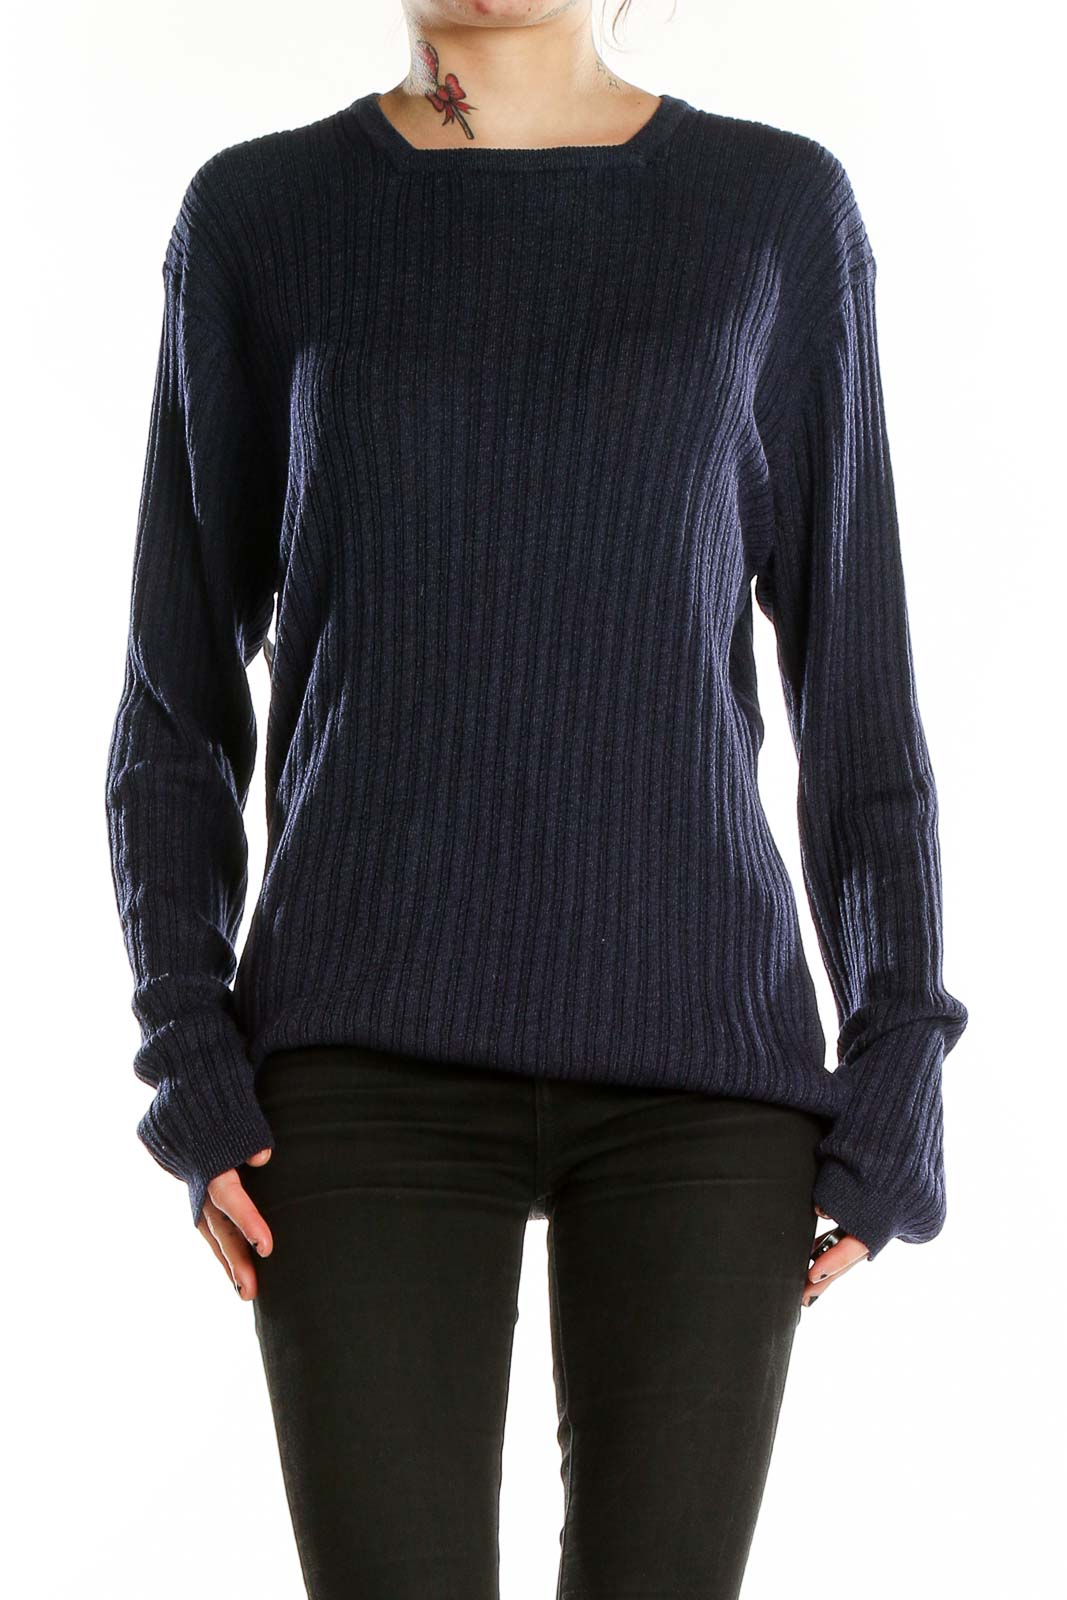 Blue Sweater Front